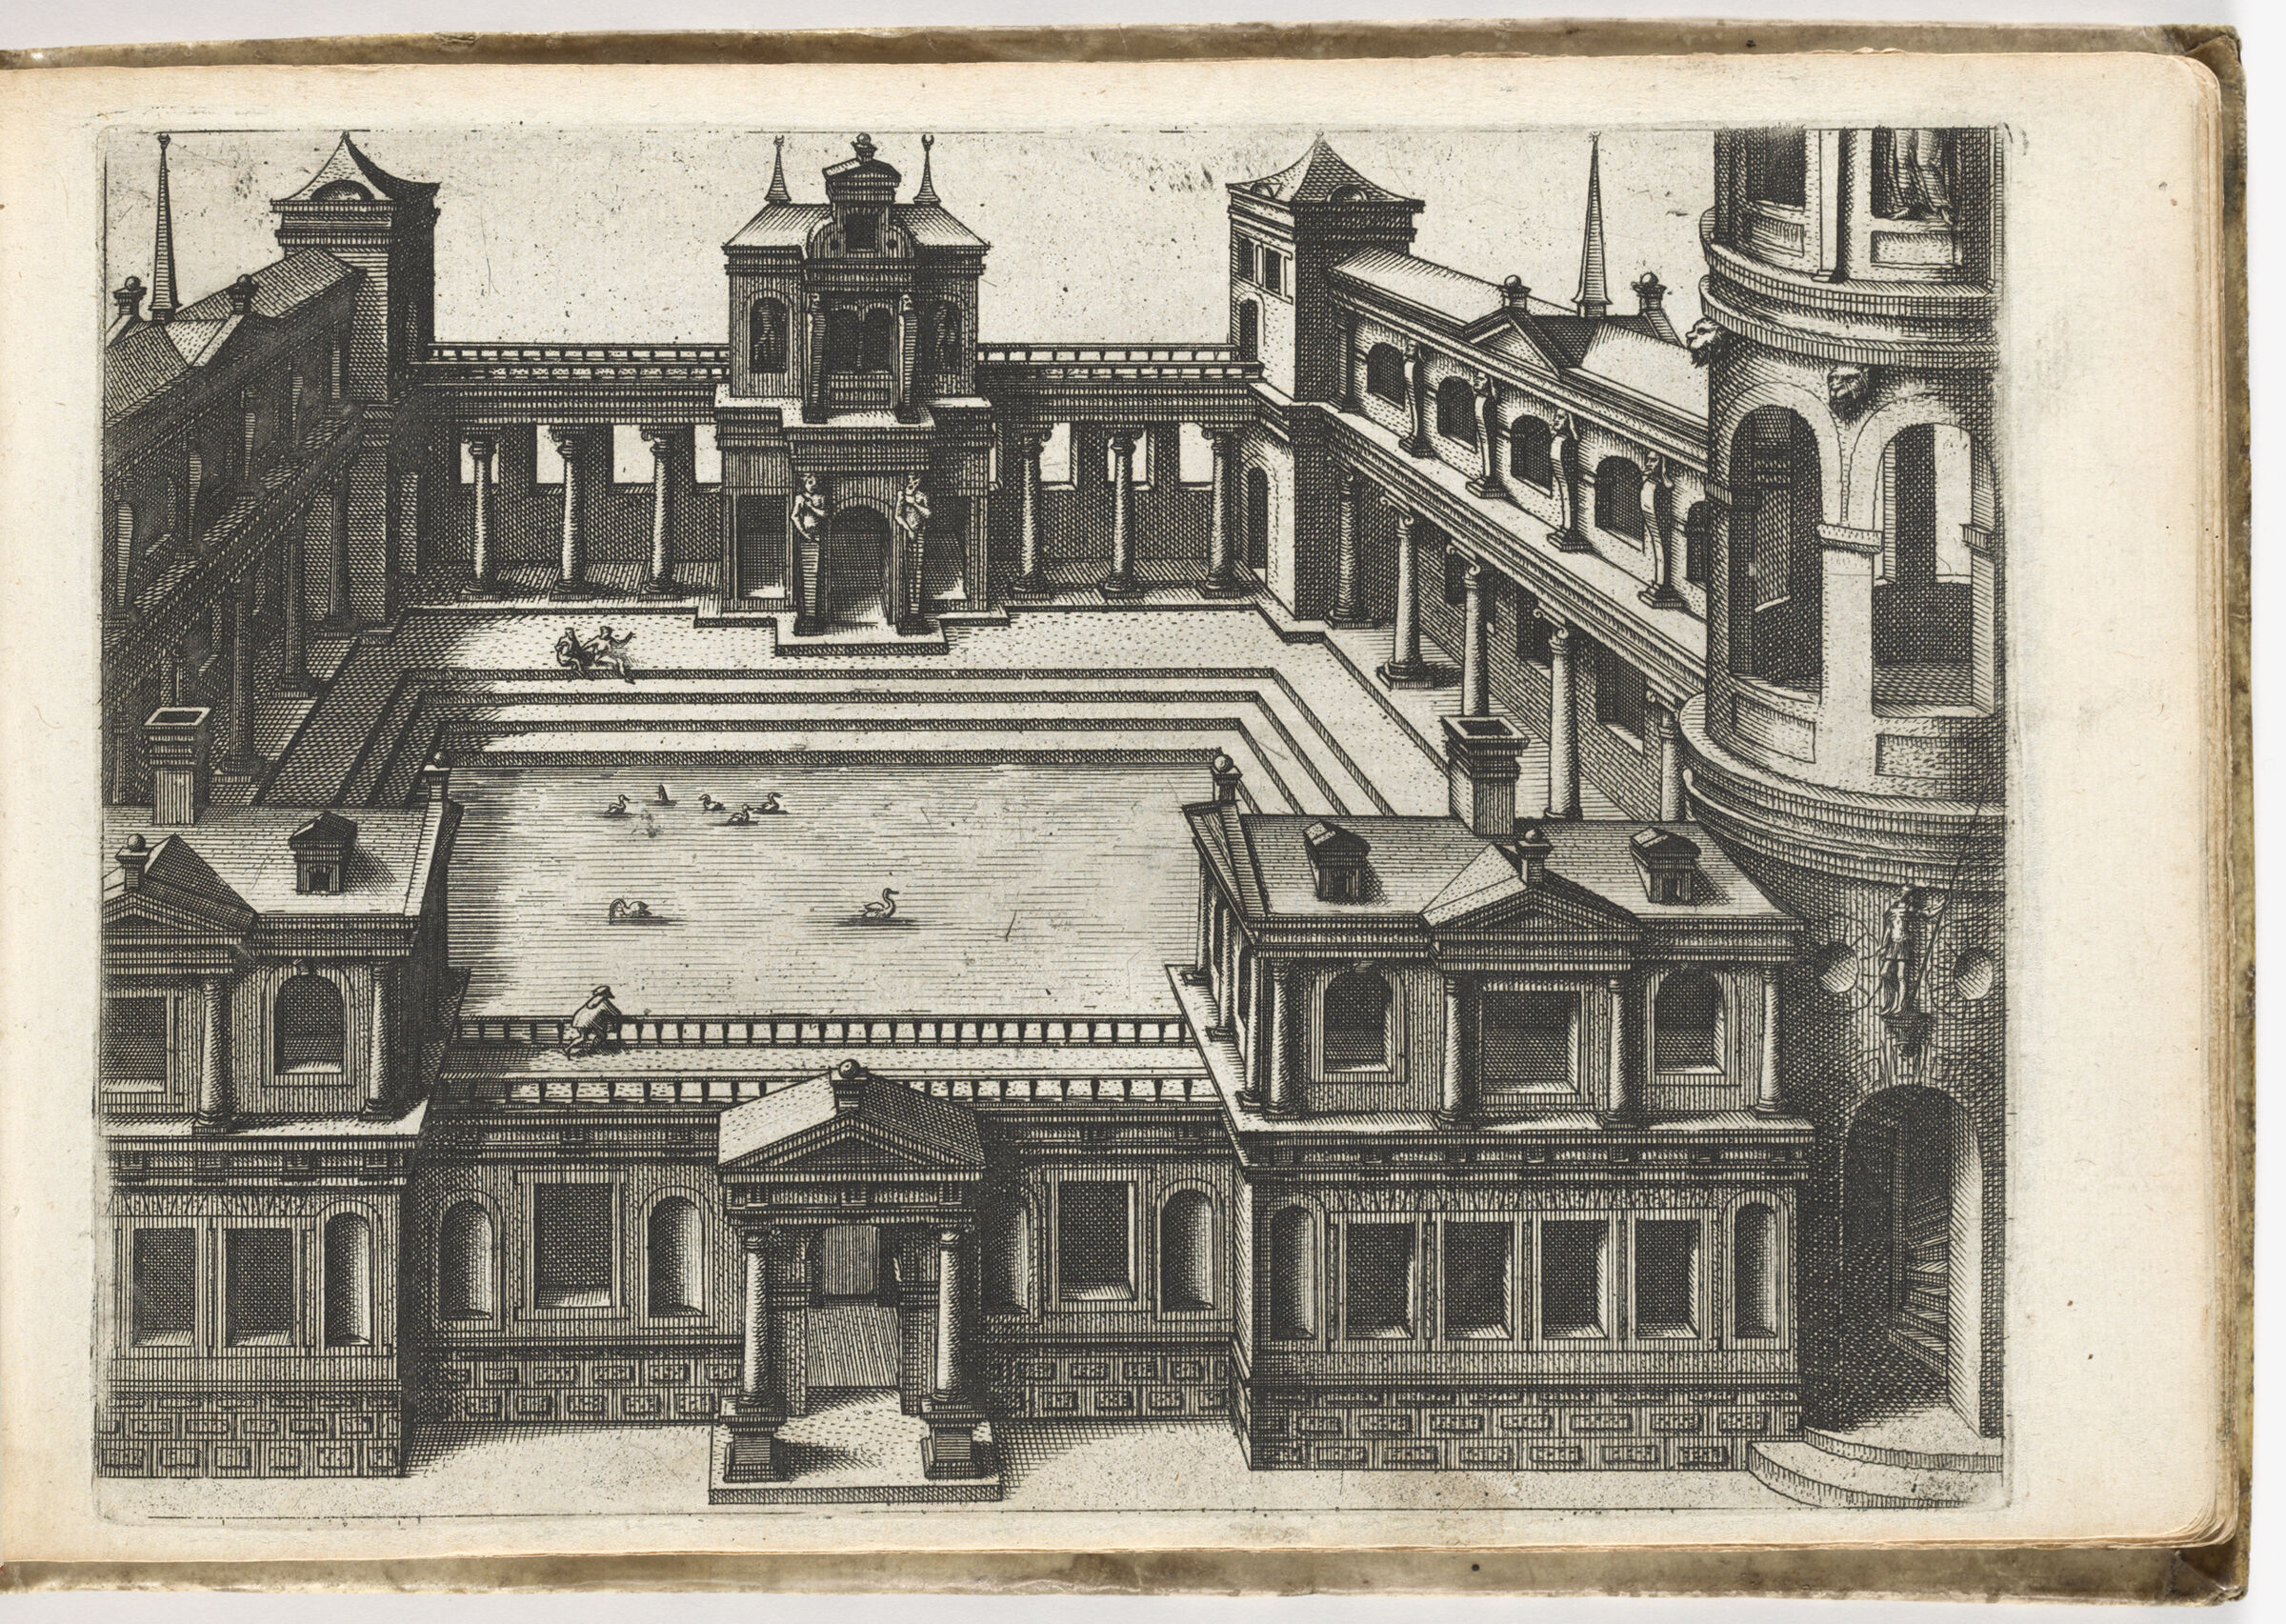 View Into A Palace Courtyard With Ducks In A Pond (N.h.)